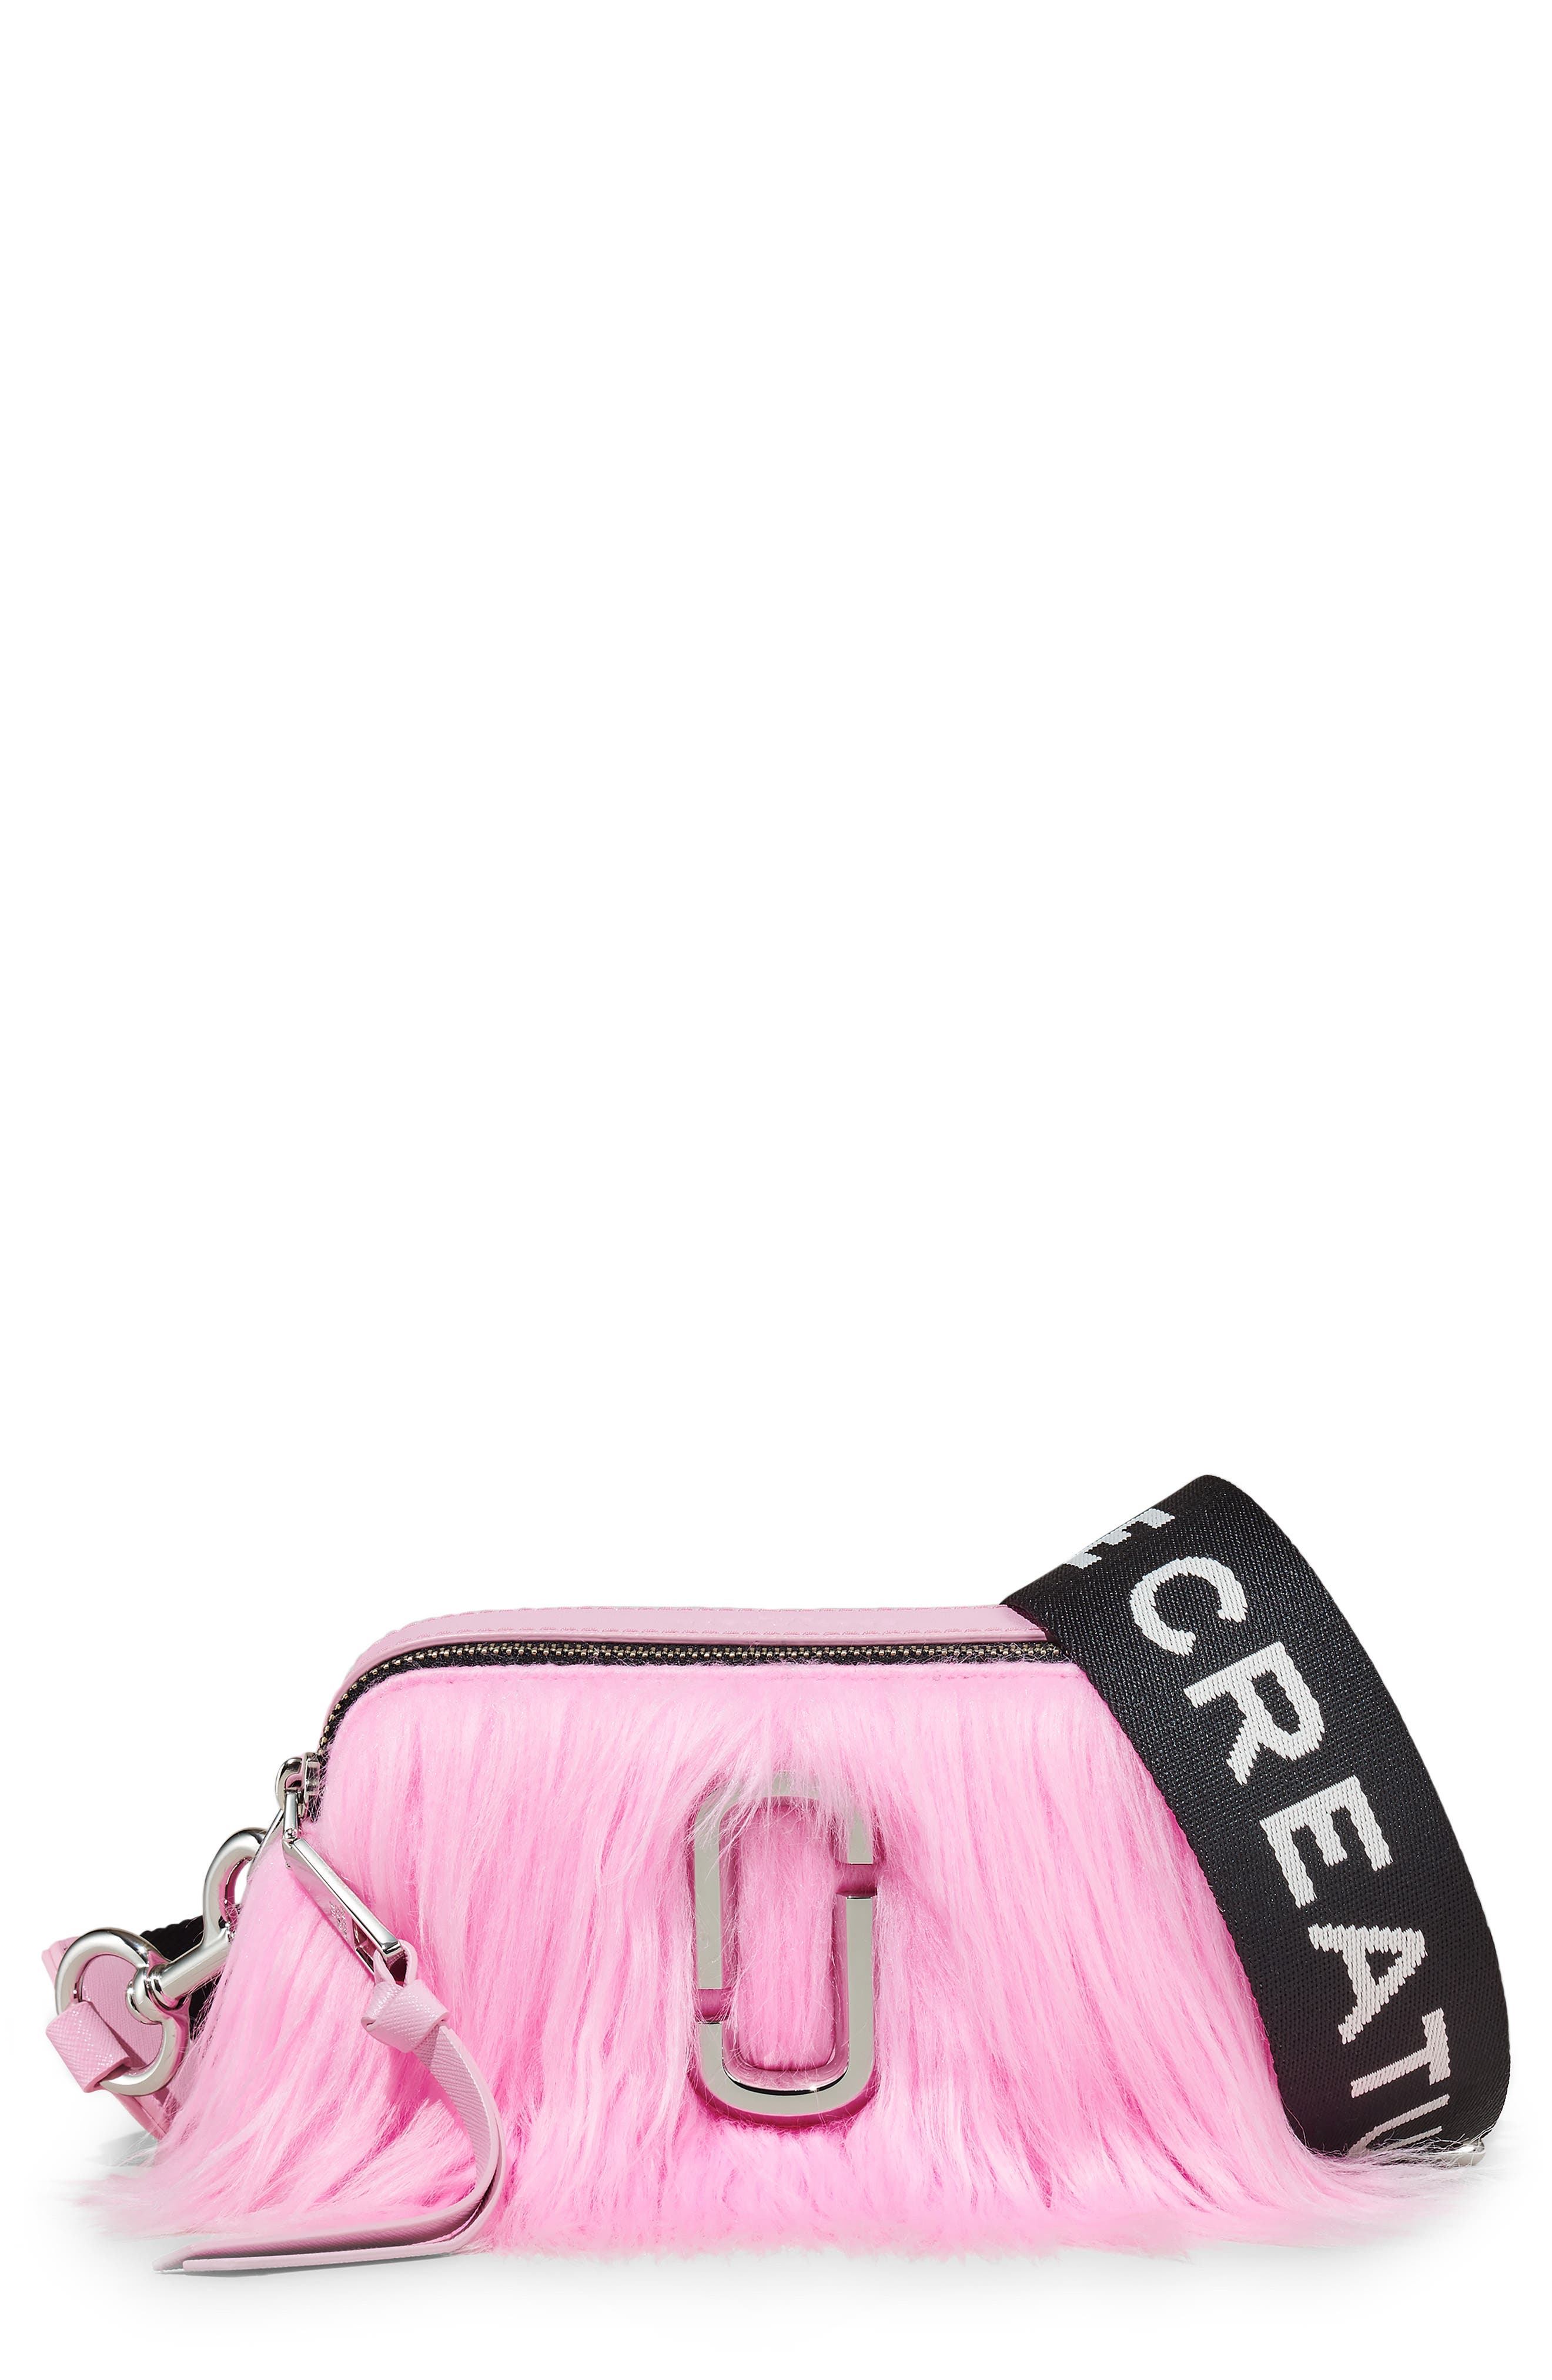 Marc Jacobs Snapshot Faux Fur Crossbody Bag in Confection Pink at Nordstrom